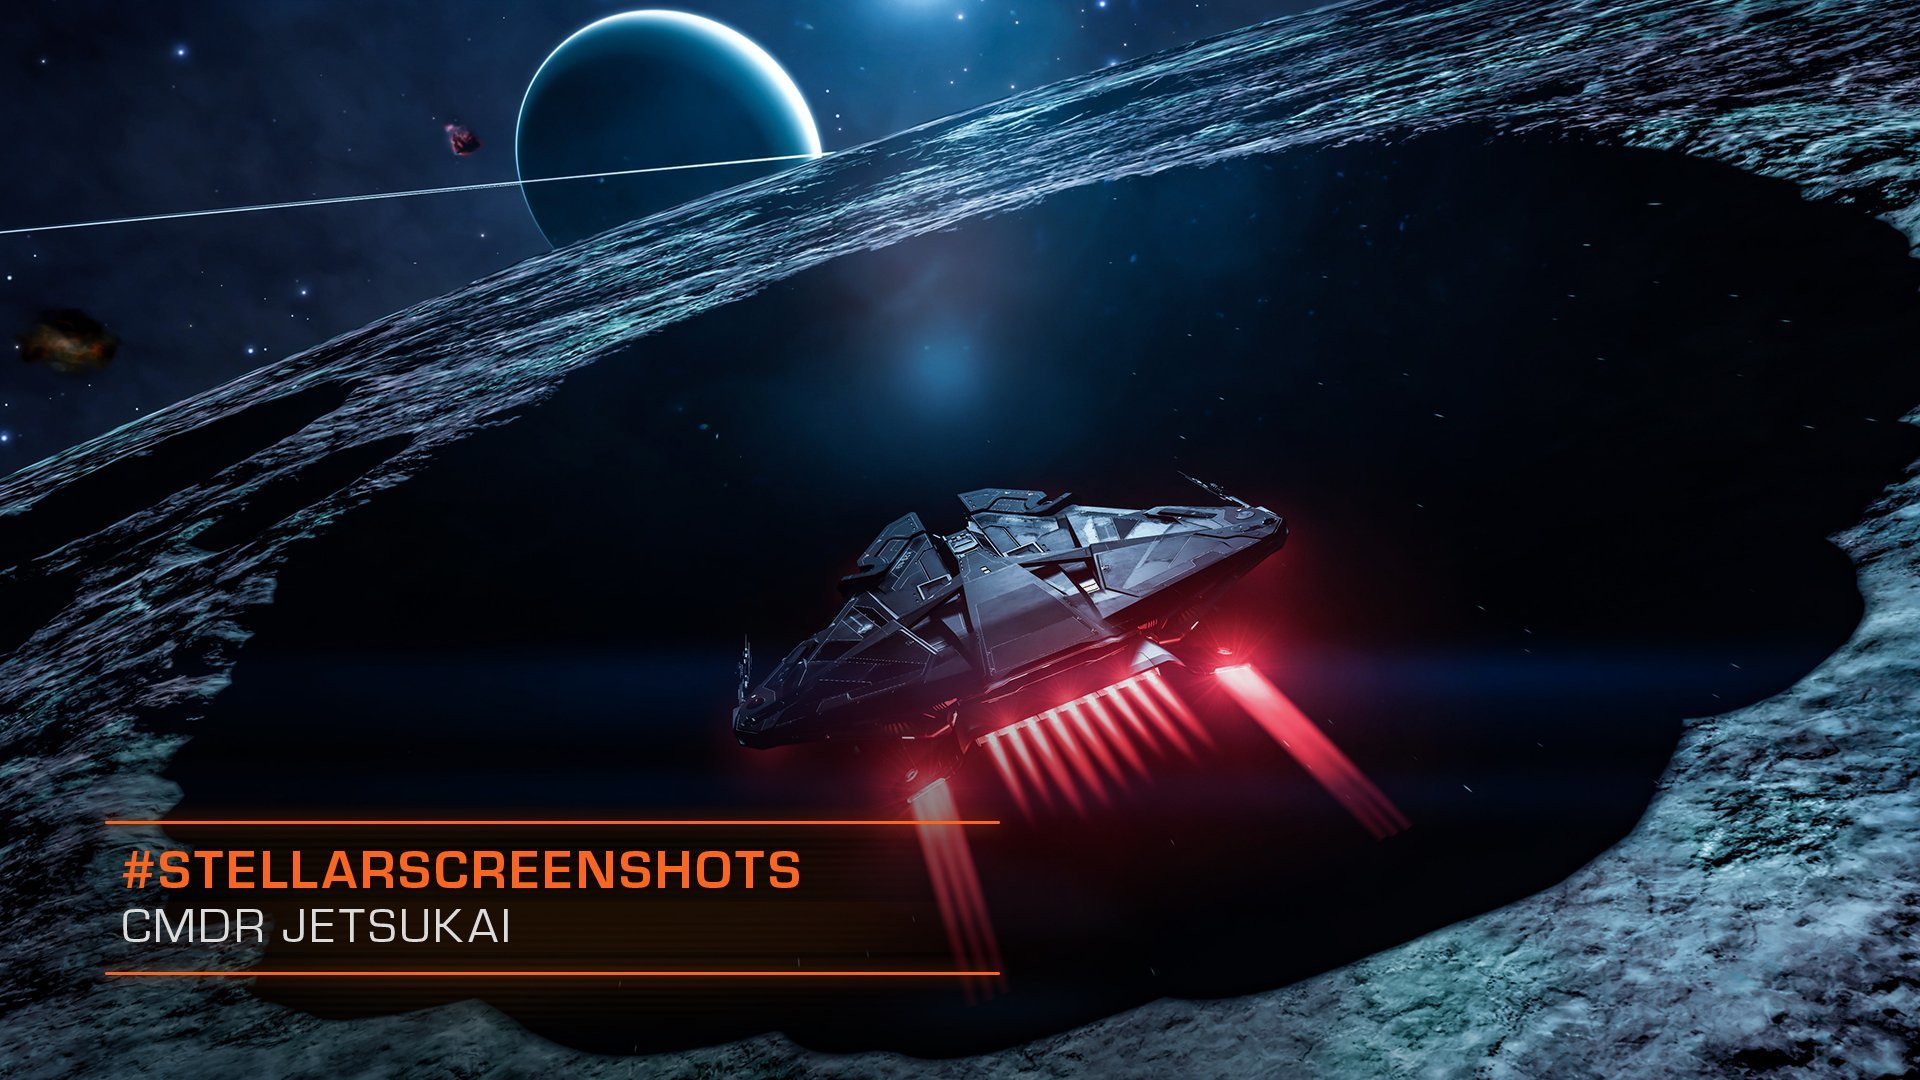 Elite Dangerous: Odyssey Q&A - Ships and Vehicles